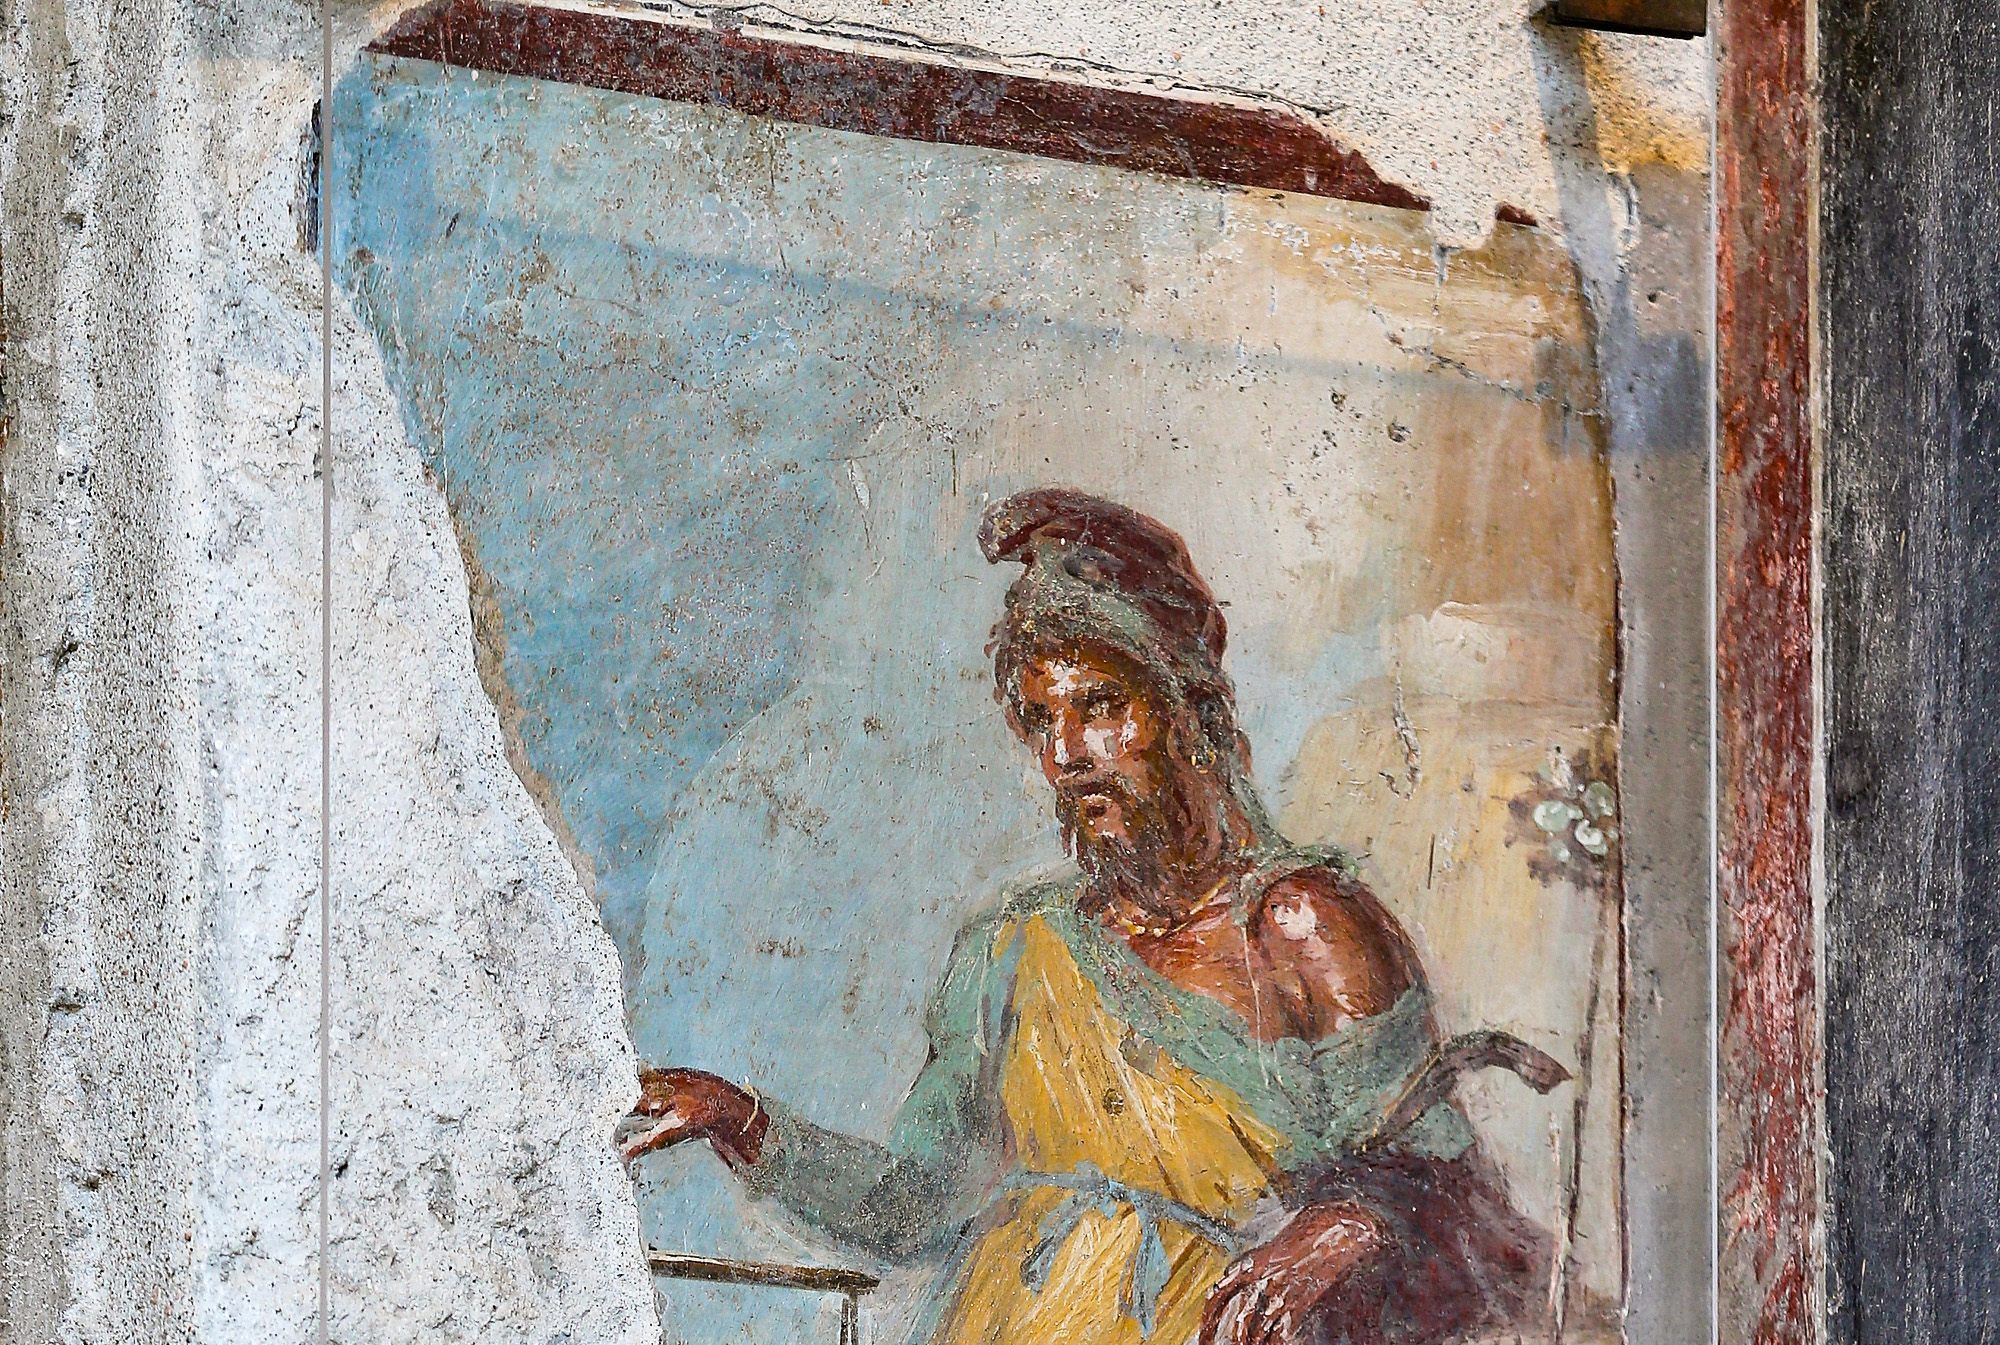 A PG portion of a portrait of Priapus. In Roman society, erotic paintings and sculptures were conversation pieces perfectly fit for polite company.